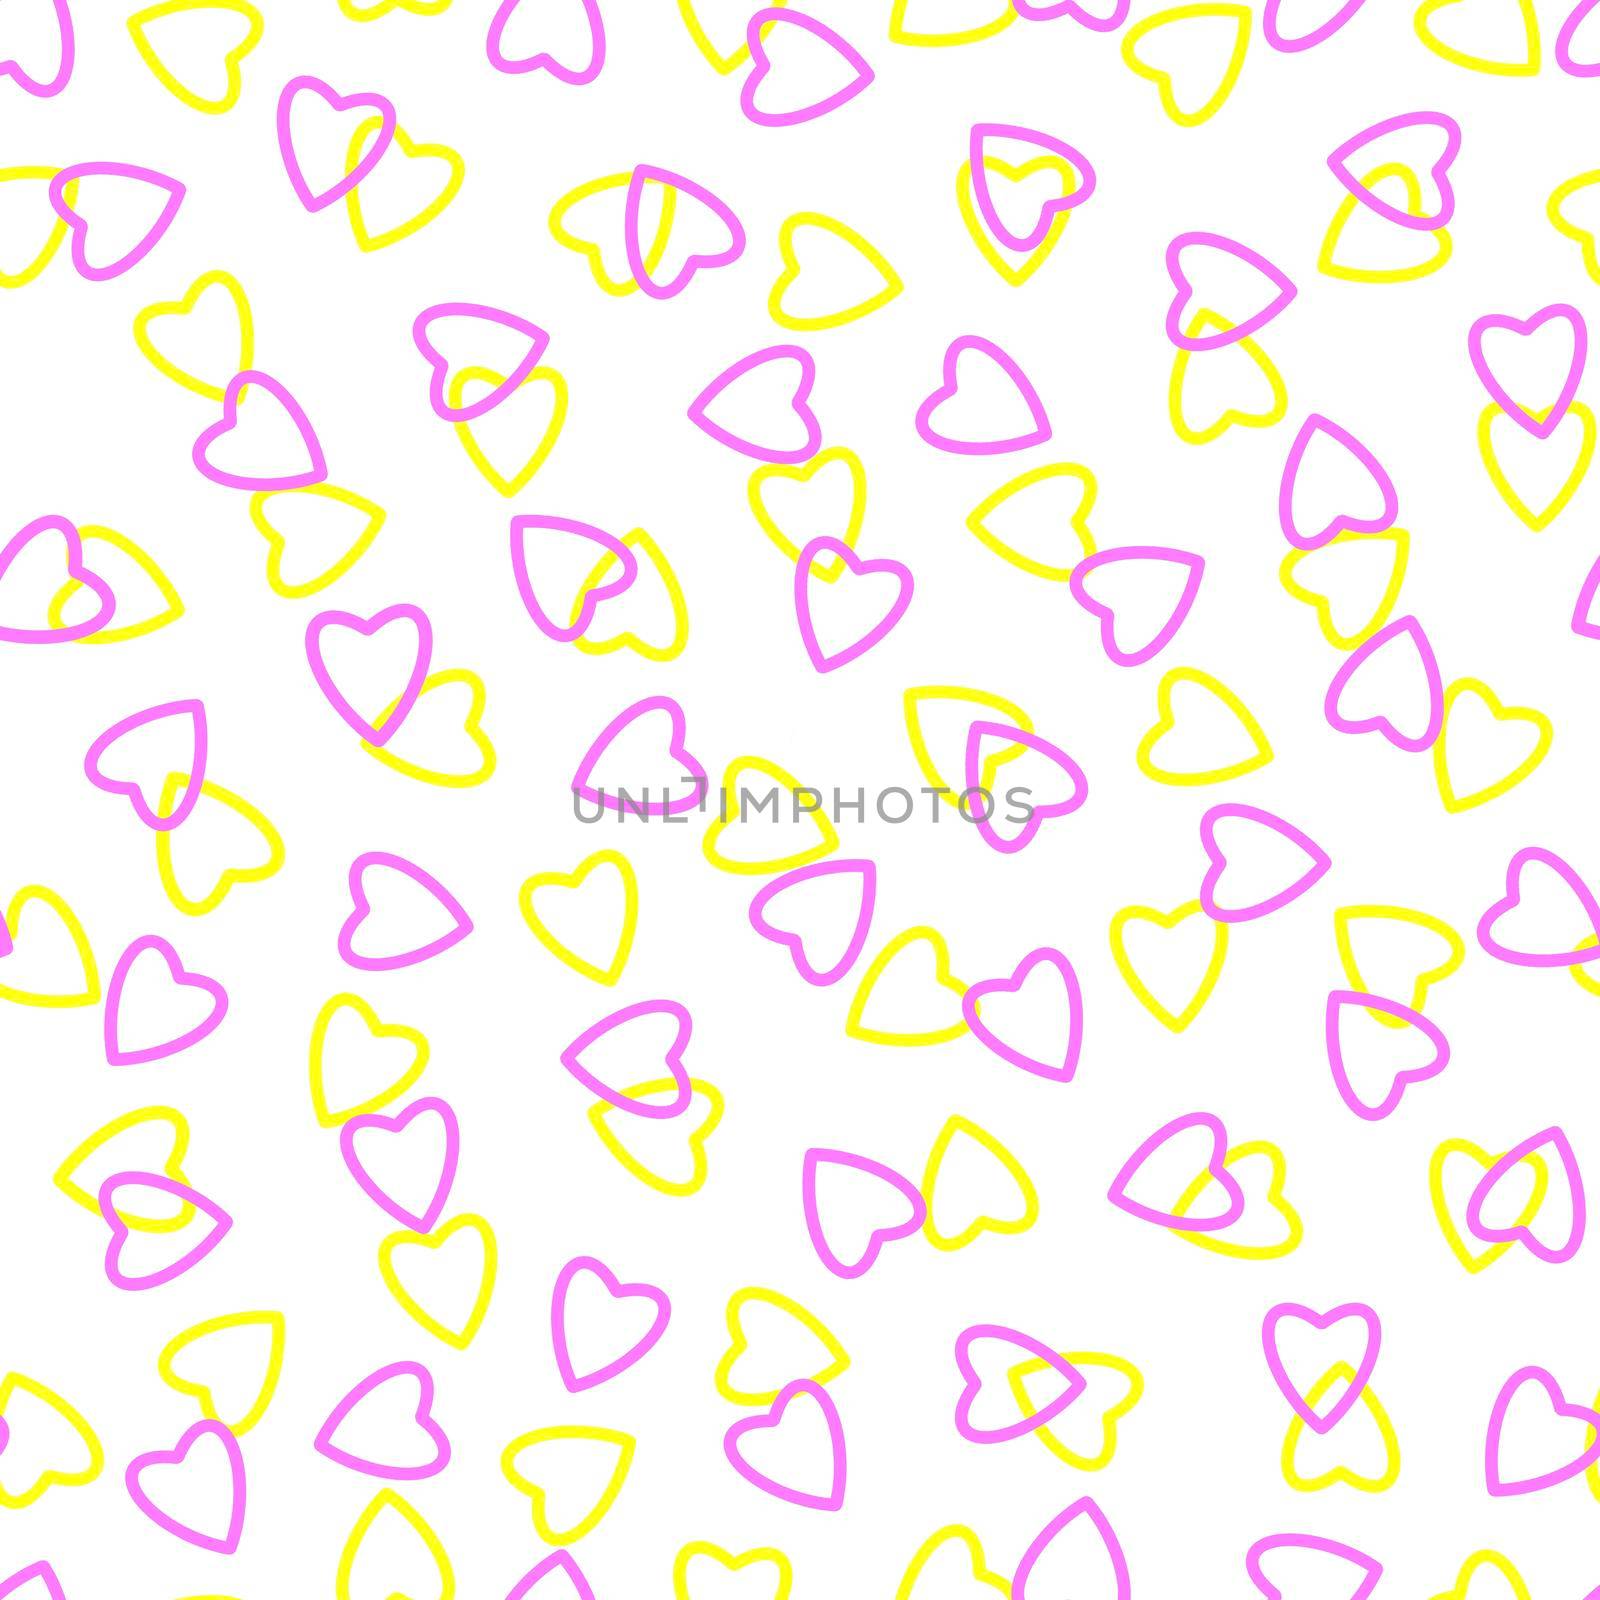 Simple heart seamless pattern,endless chaotic texture made of tiny heart silhouettes.Valentines,mothers day background.Pink,yellow,white.Great for Easter,wedding,scrapbook,gift wrapping paper,textiles